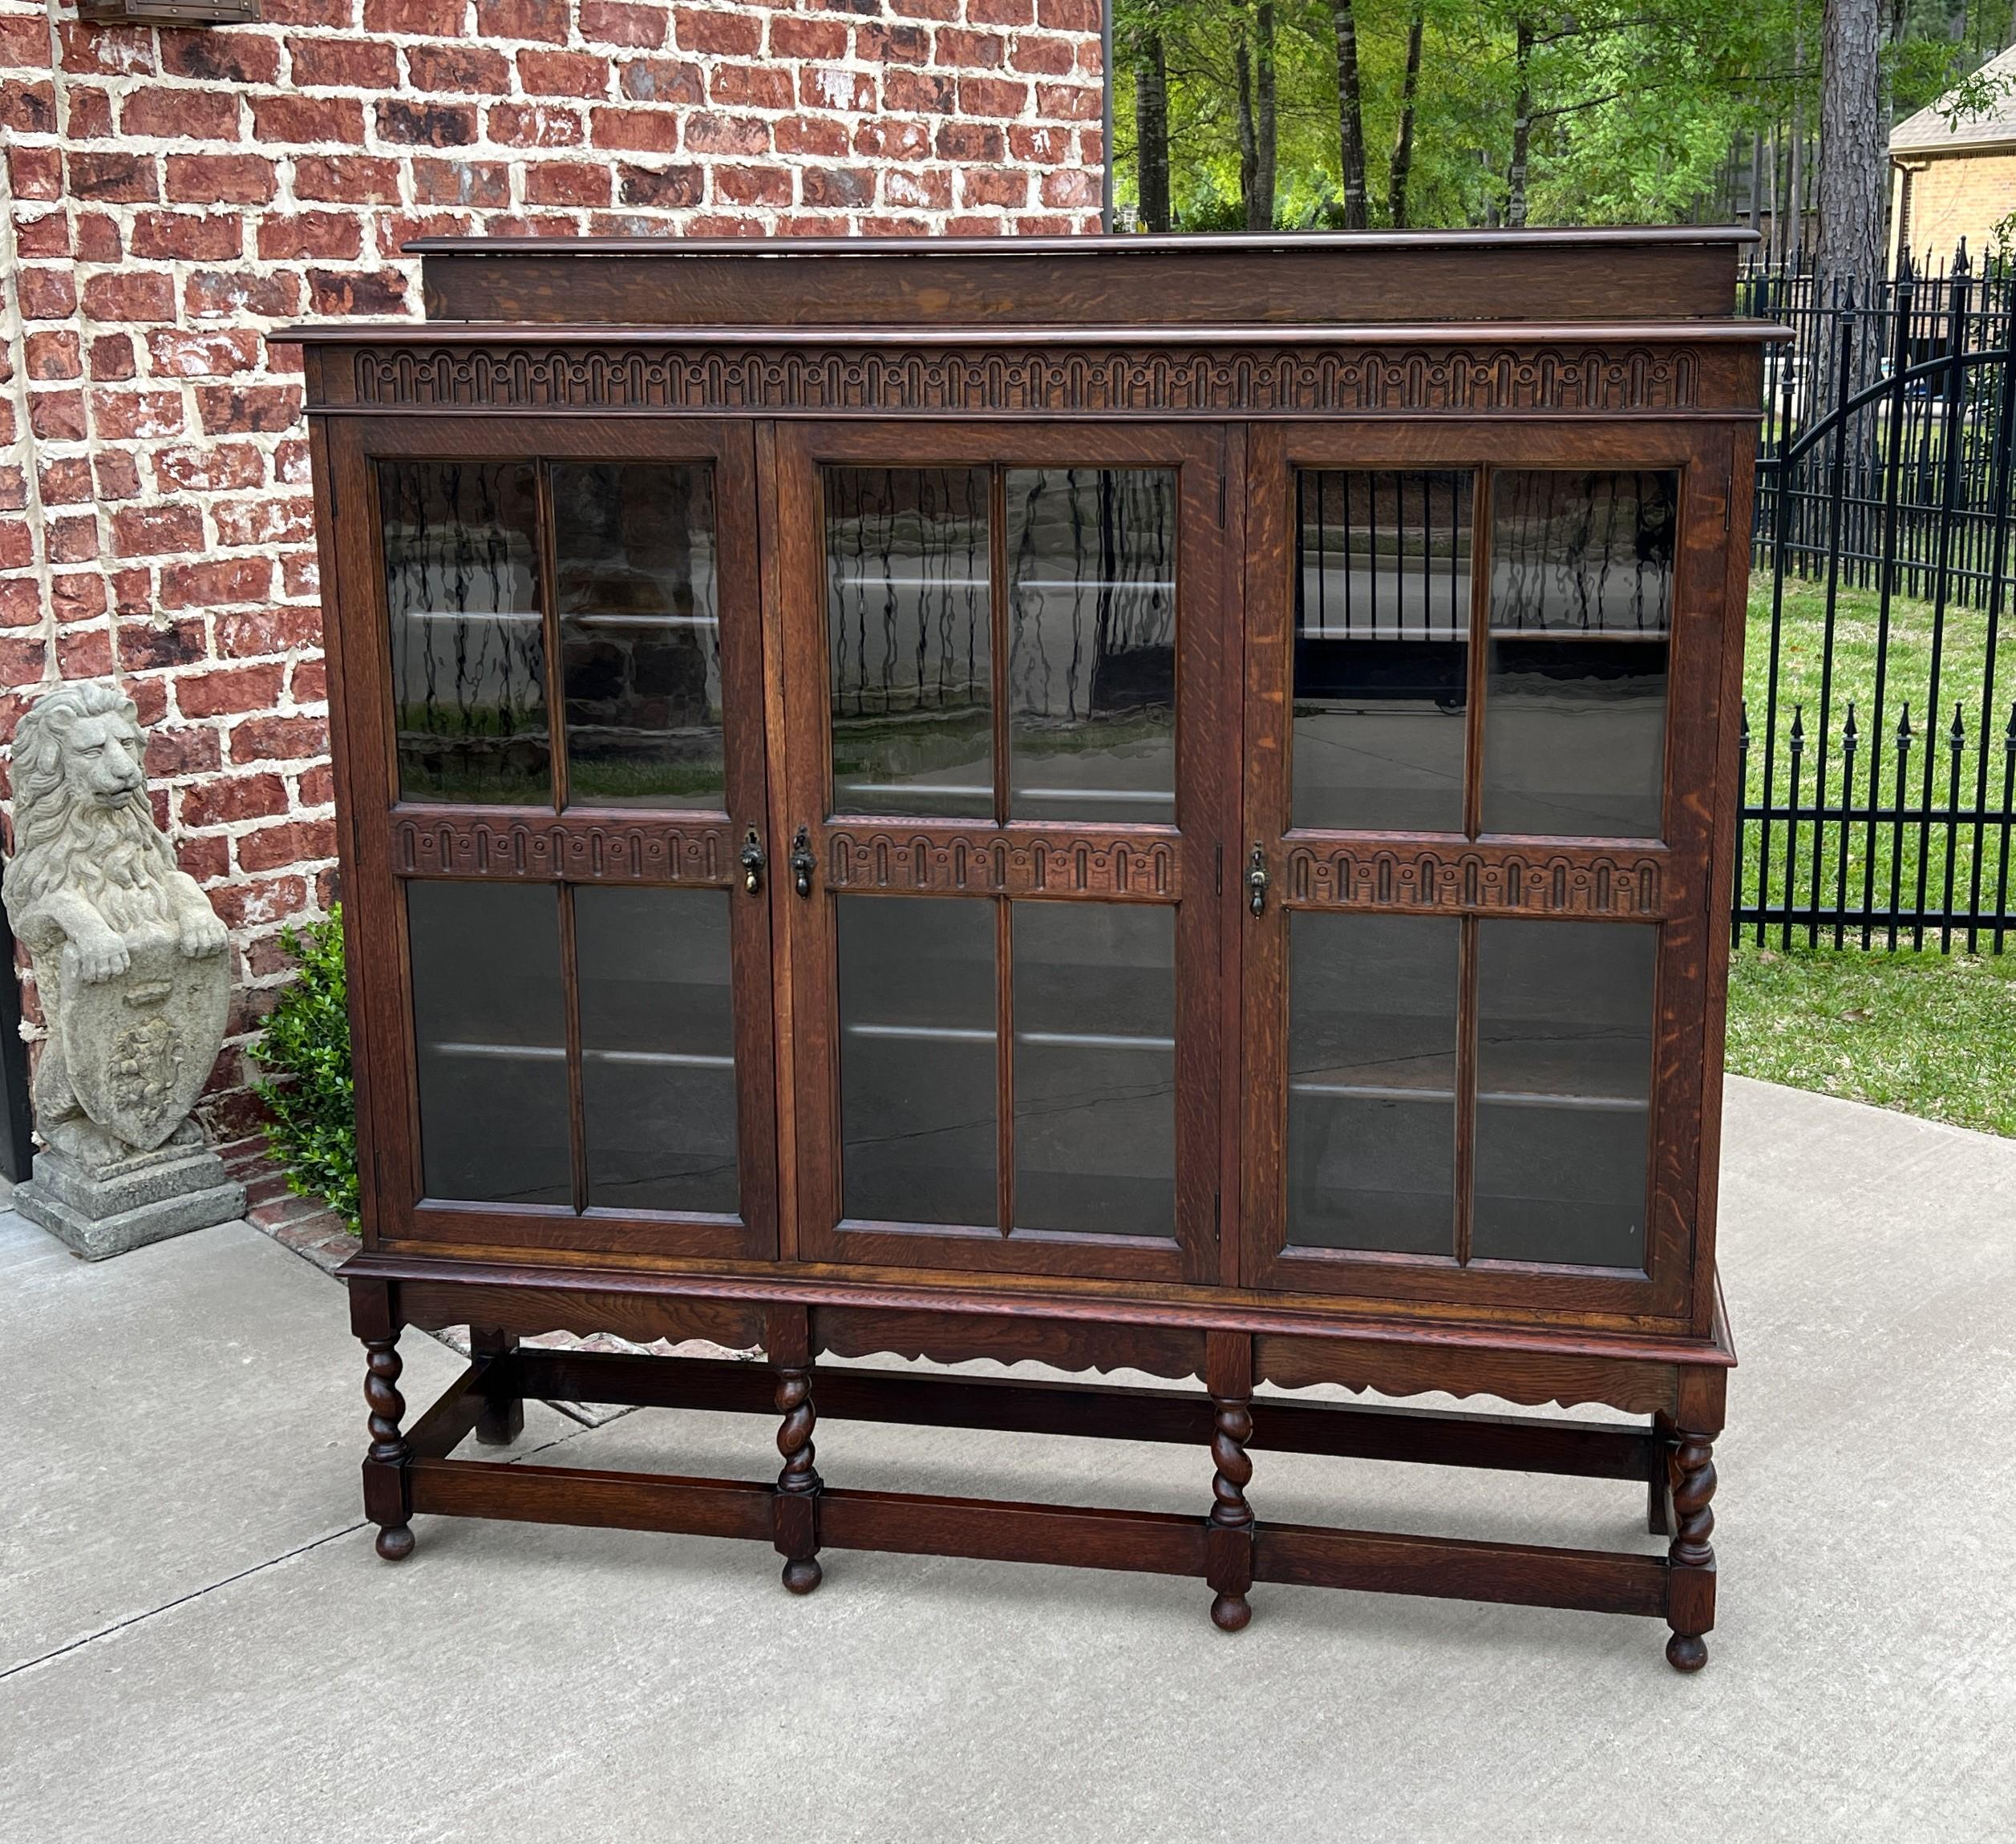 Charming antique English oak Jacobean style barley twist 3-door bookcase or display shelf/cabinet~~circa 1920s

Perfect for displaying your favorite antique books or collectibles

Original brass 